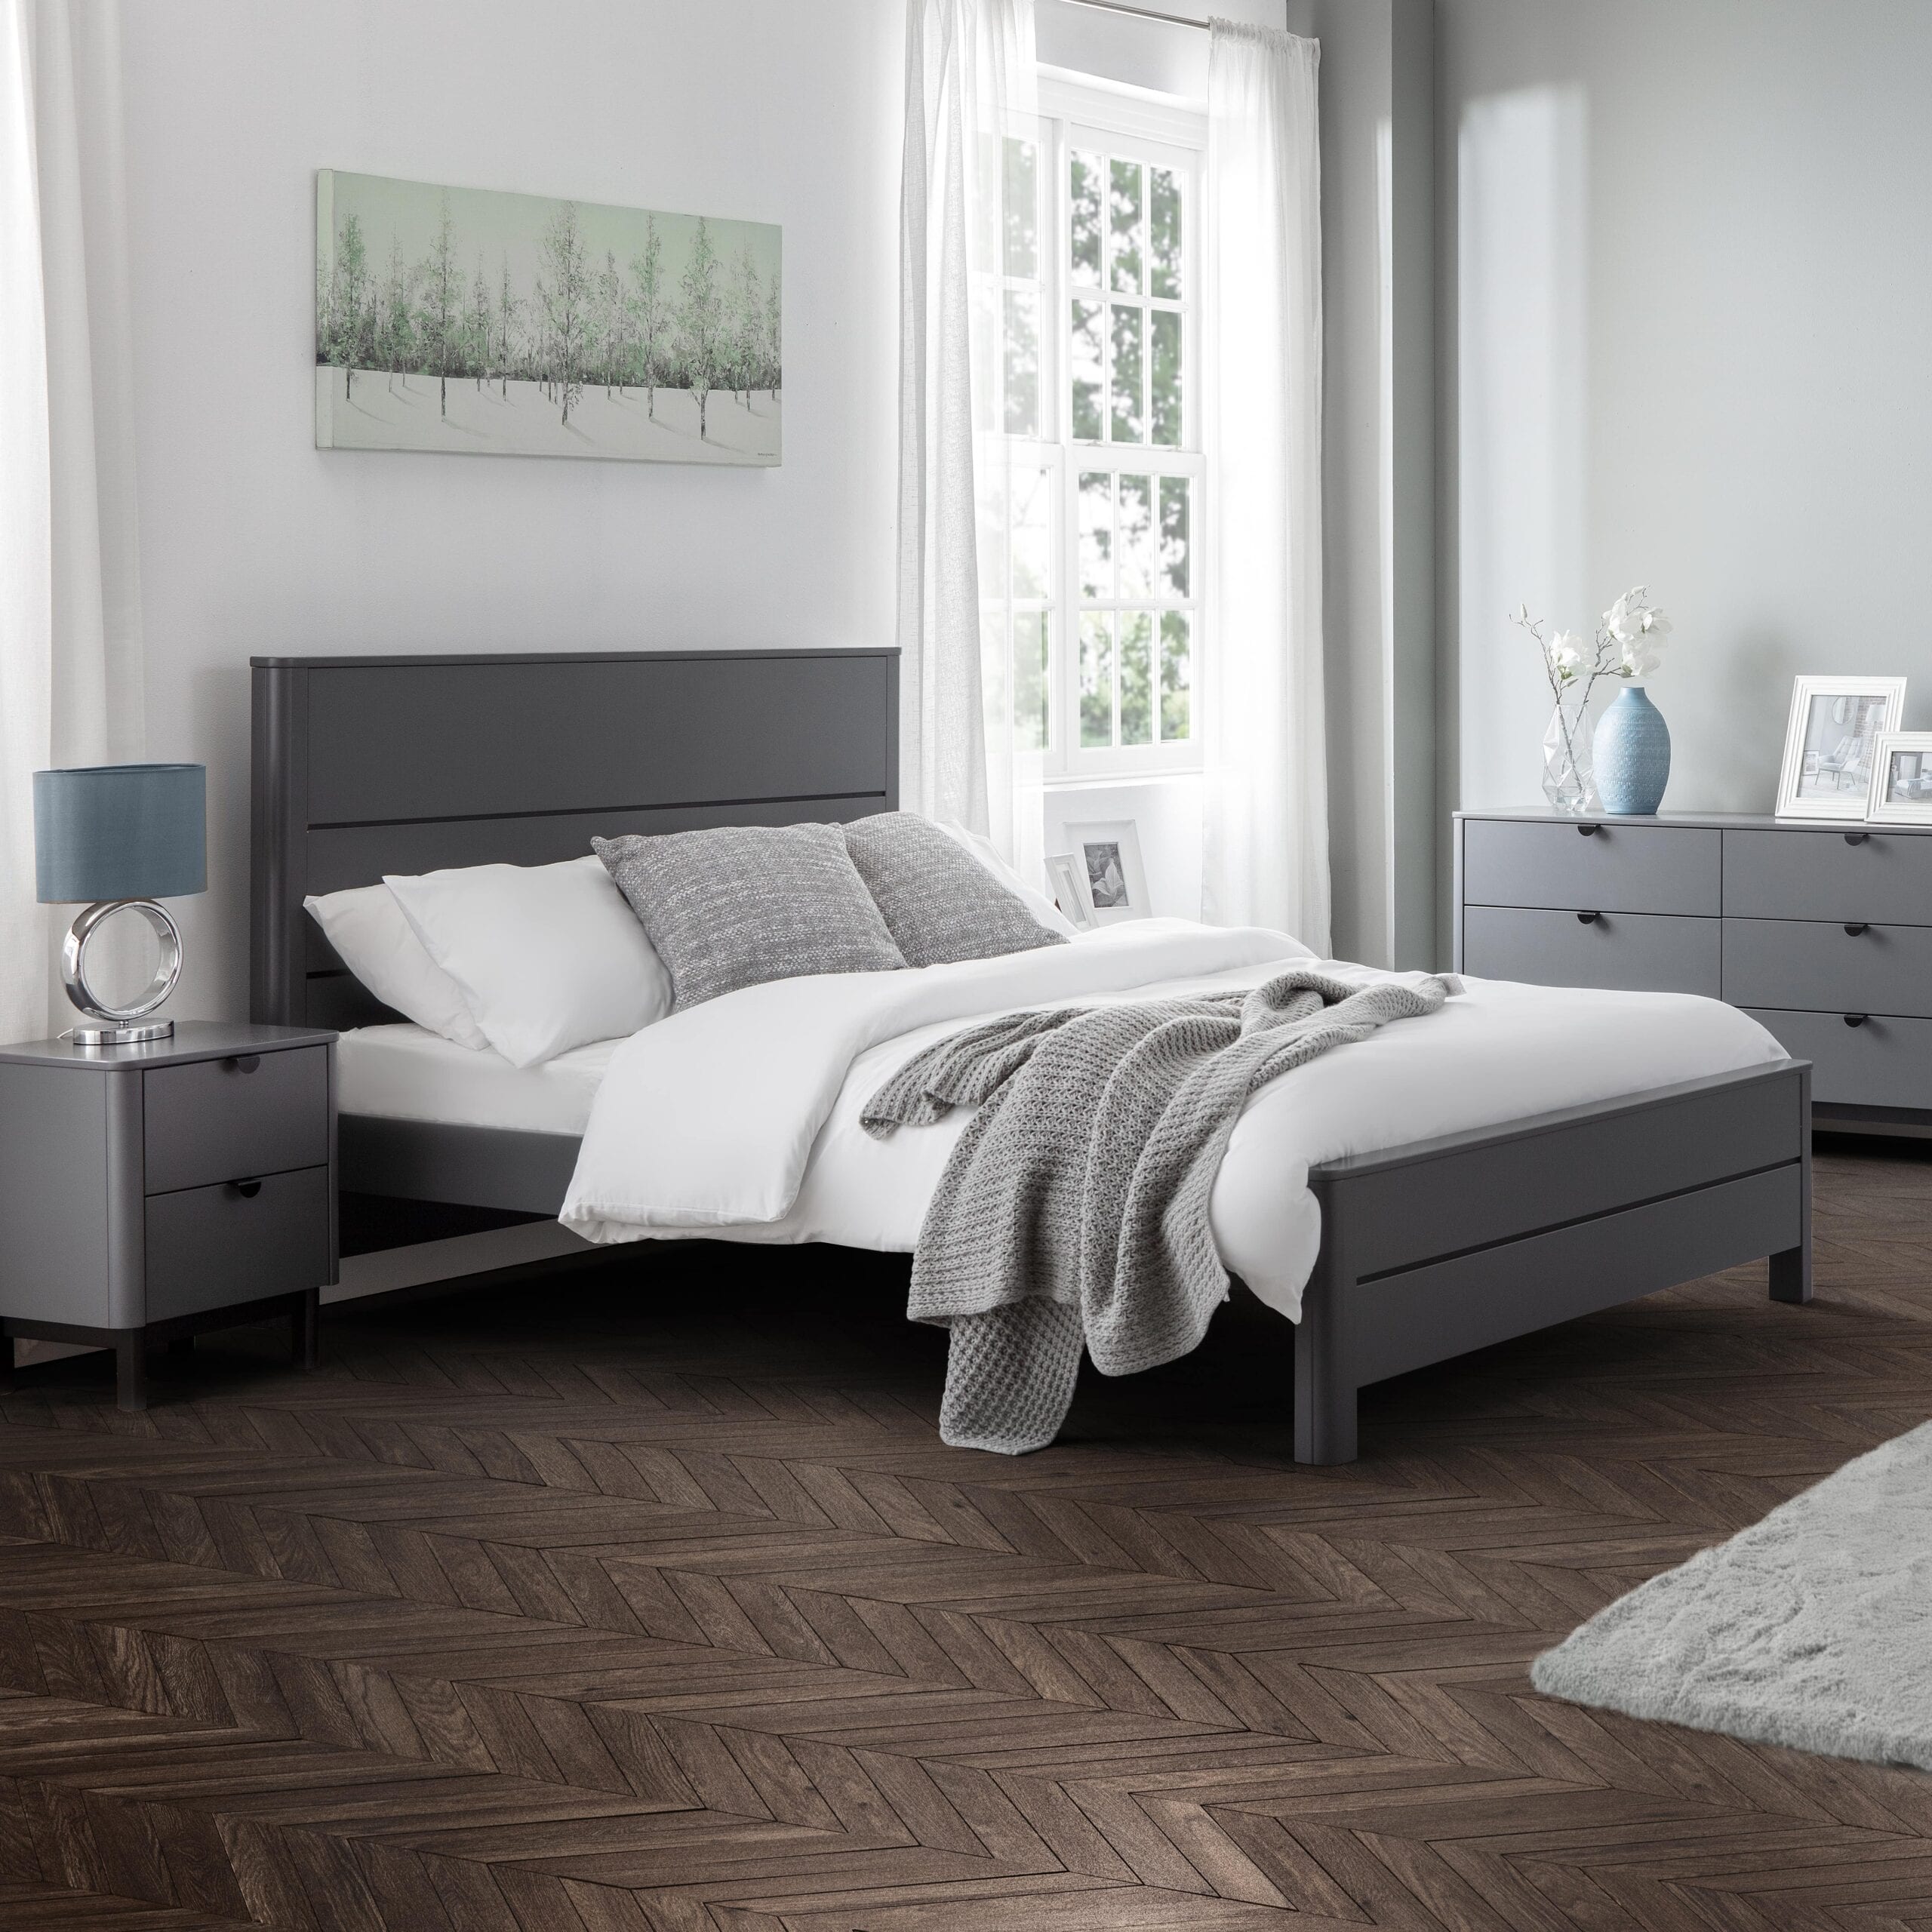 The Cleo 135Cm Bed Storm Grey Lacquer